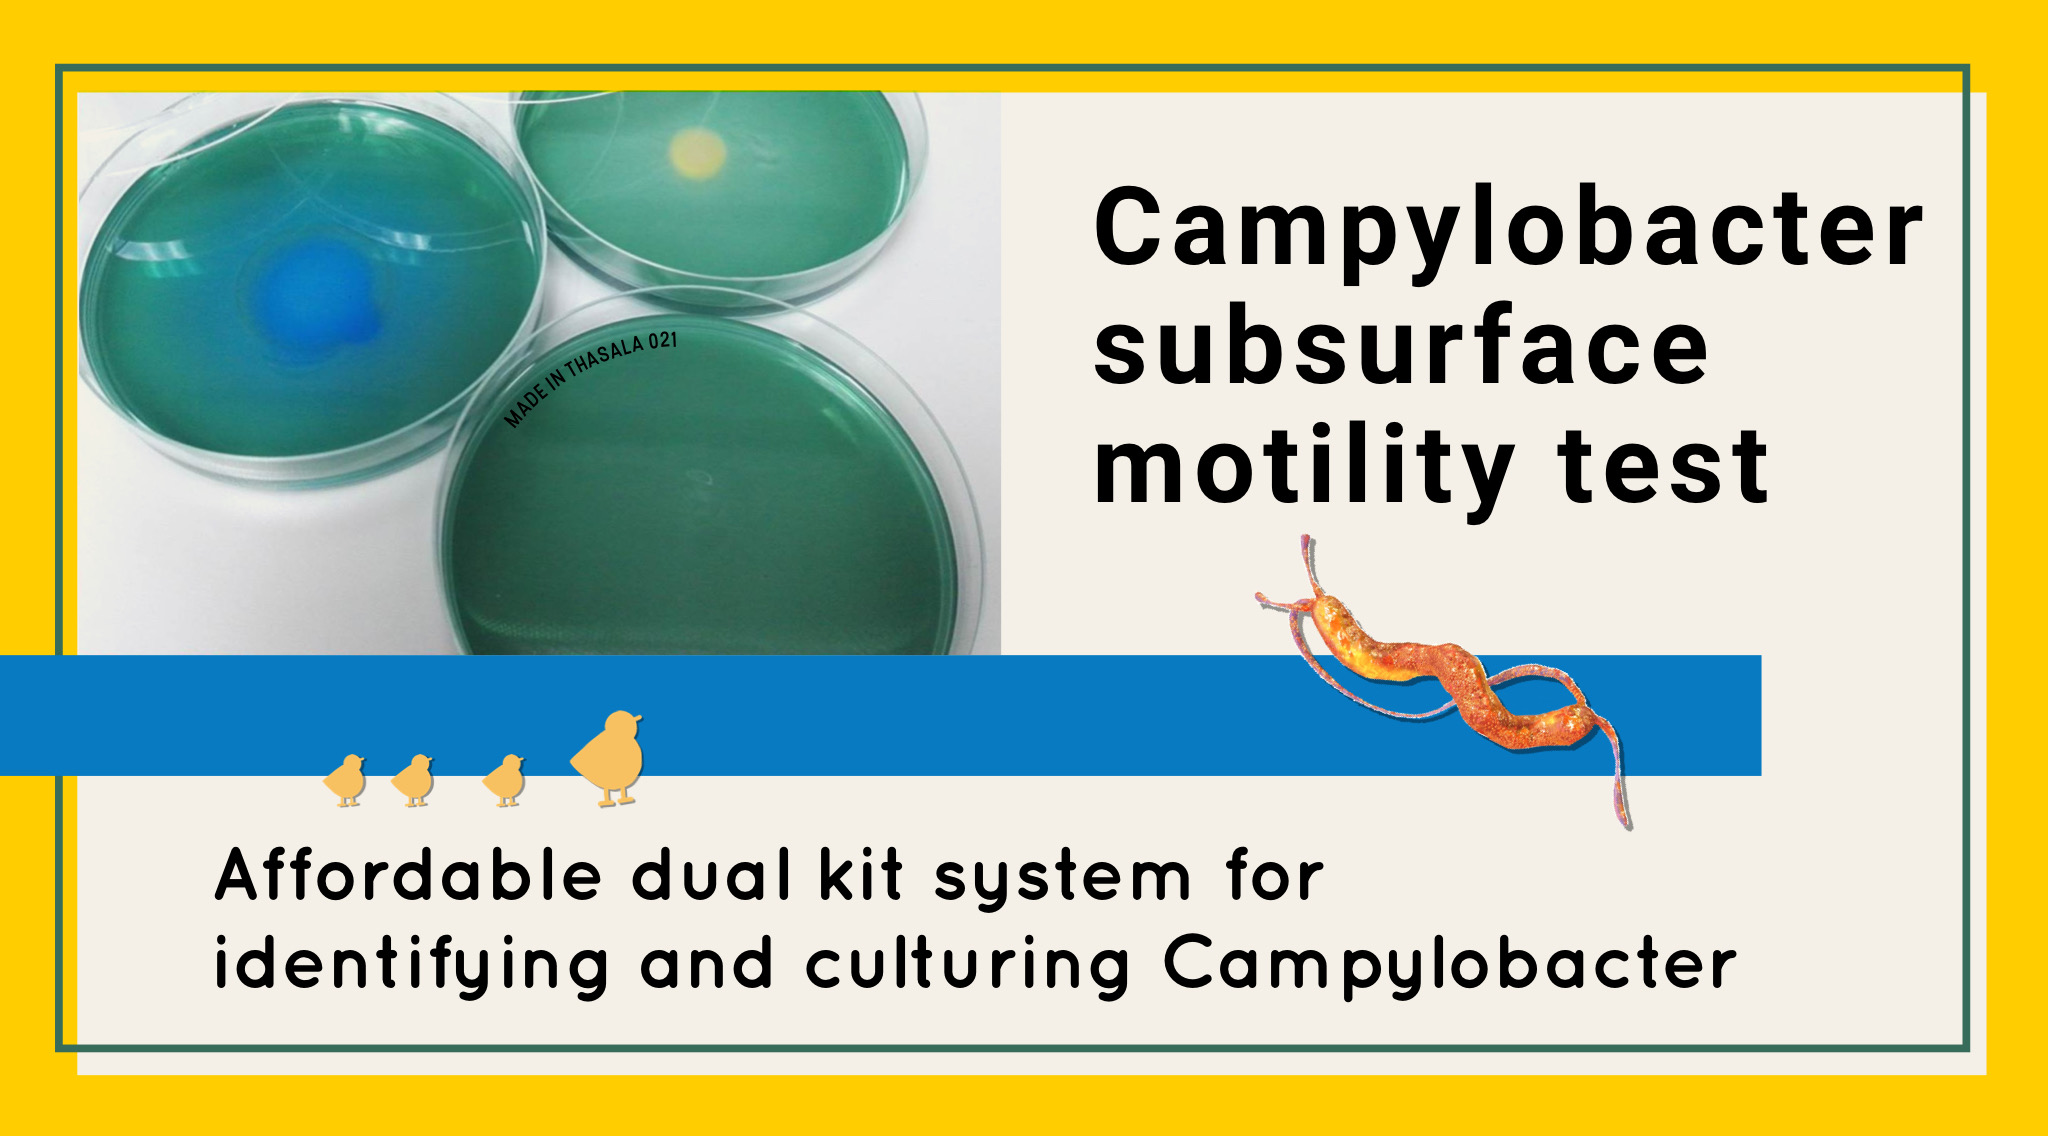 Campy Subsurface Motility Test – affordable dual kit system for identifying and culturing Campylobacter